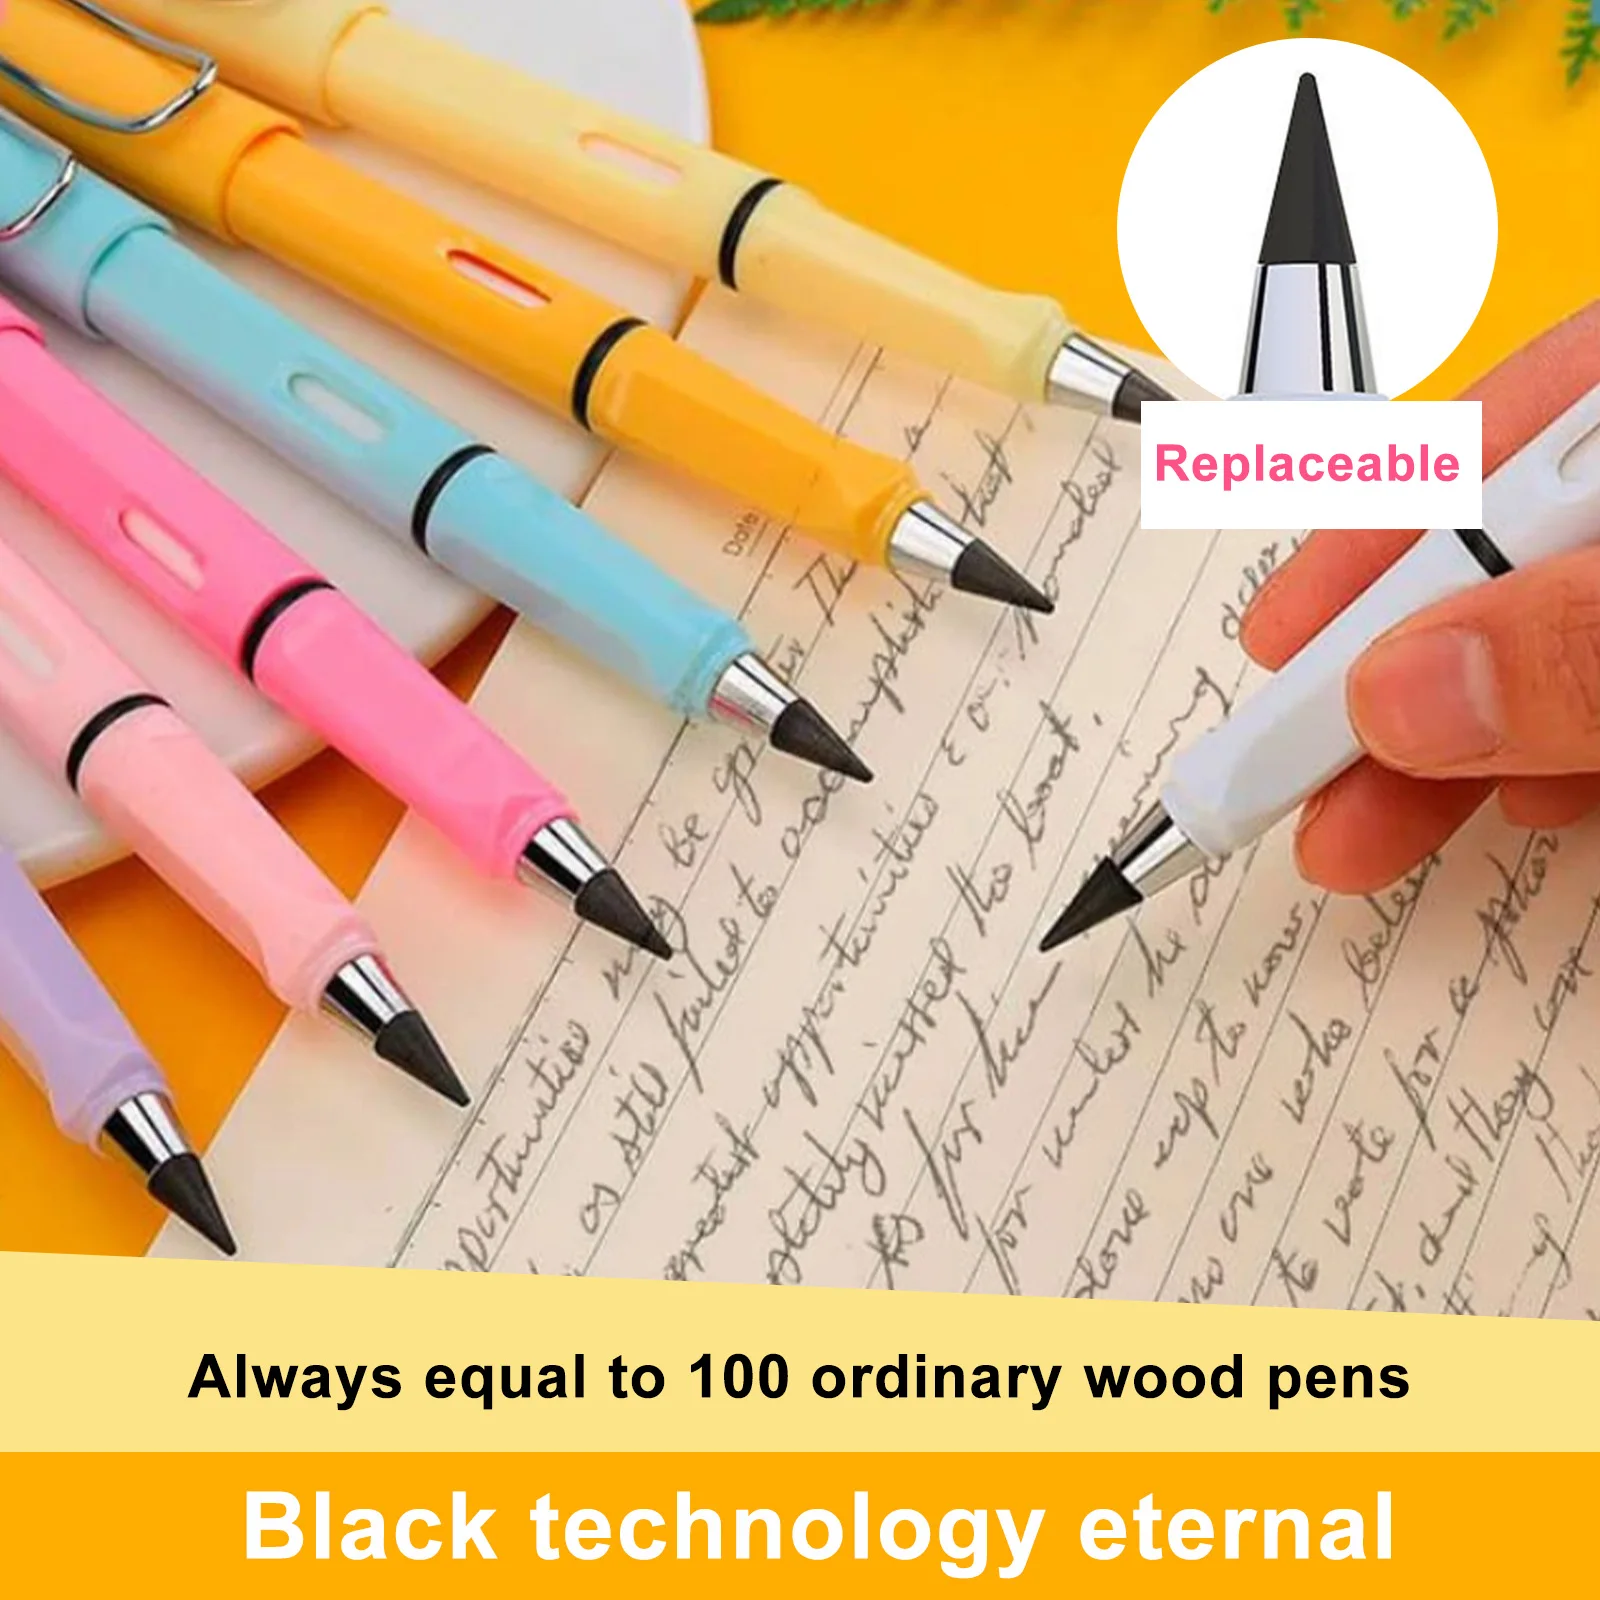 New Technology Eternal Pencil Without Ink Endless Pen White Pencil for School Art Sketch Painting Tool Kids Stationery Supplies